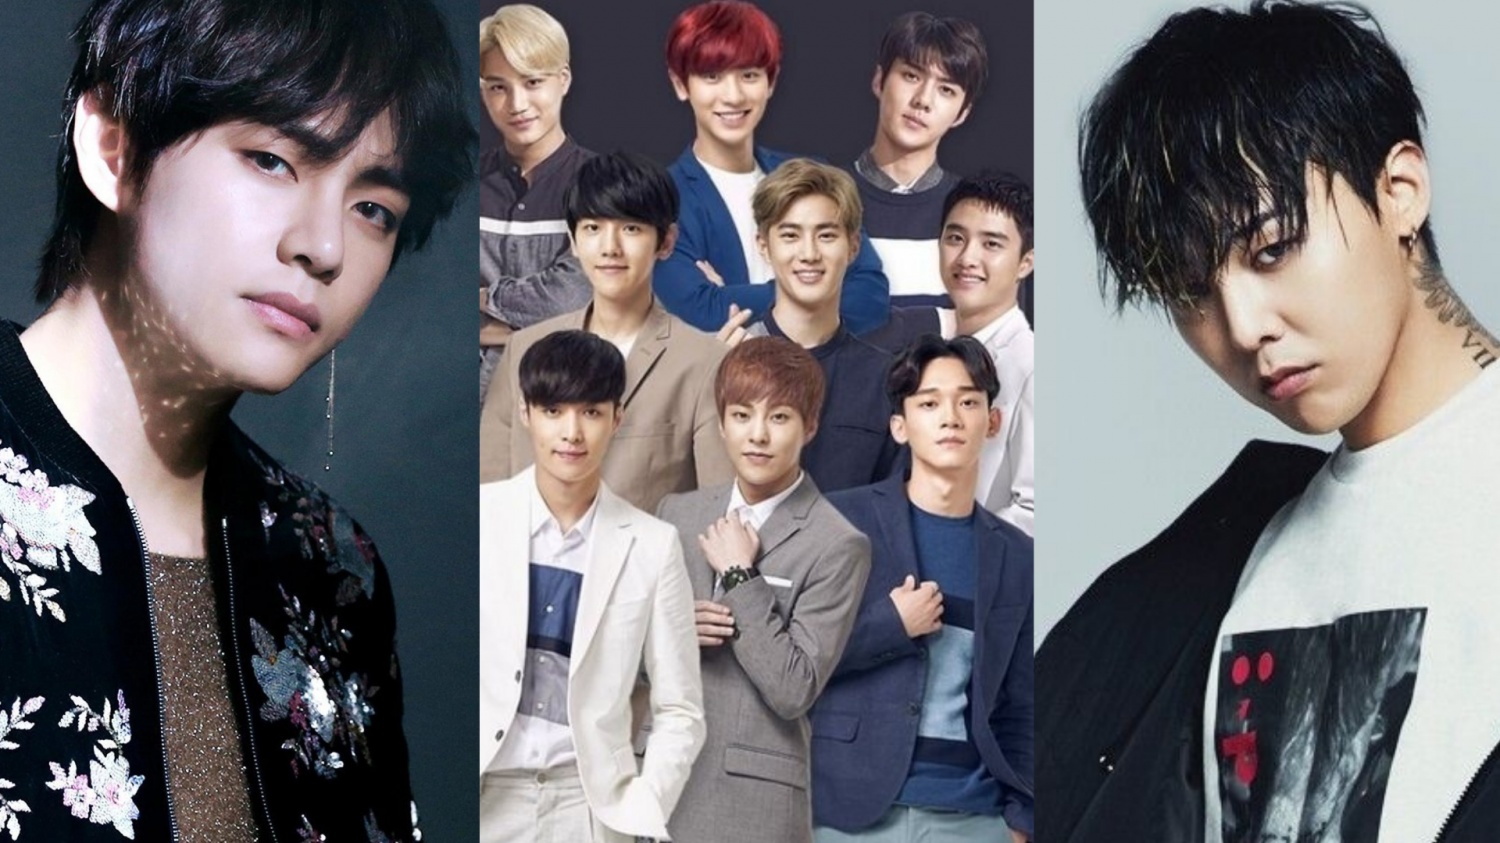 Here Are The Most Popular Male KPop Groups and Idols on Weibo in The